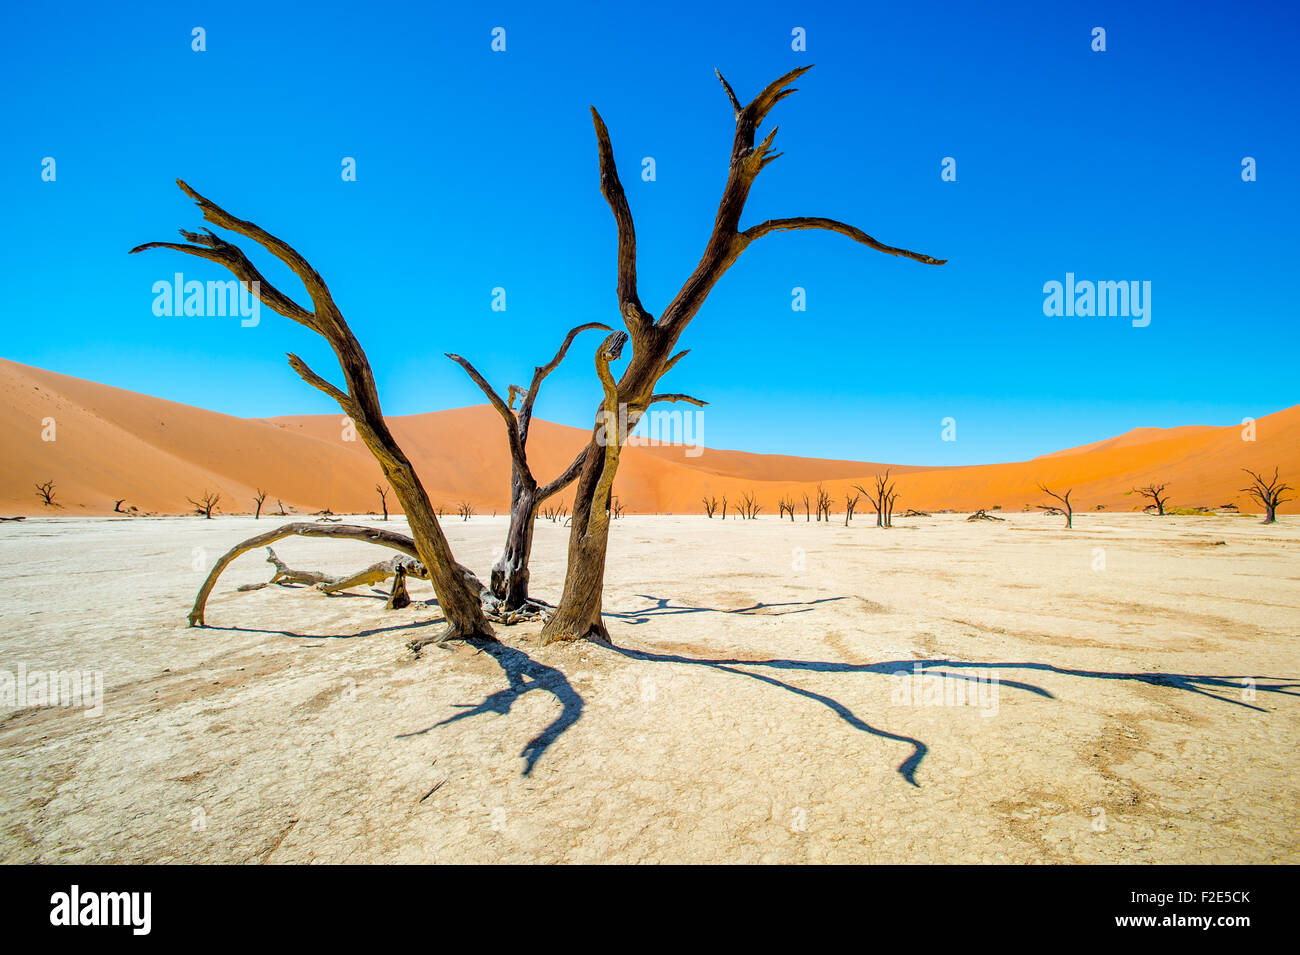 Sossusvlei Namibia - Dead vlei pan and its famous camel thorn trees Stock Photo